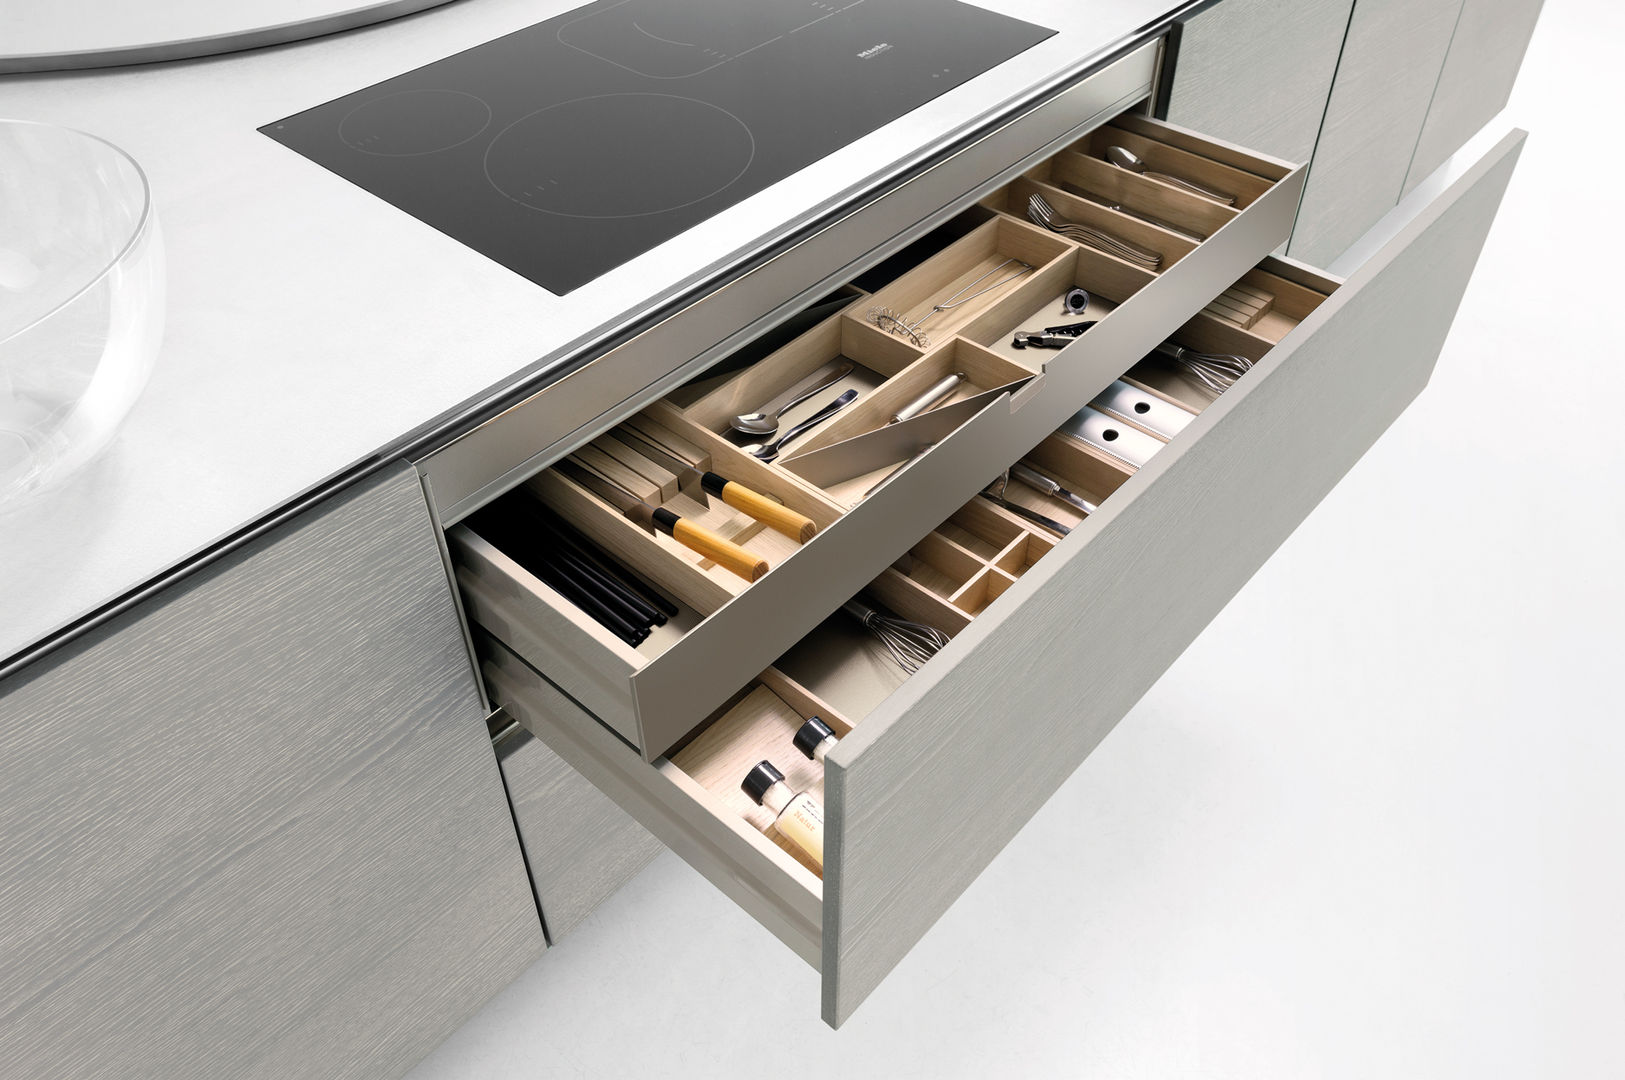 Storage options to make life easier fit Kitchens Cuisine moderne Accessoires & Textiles